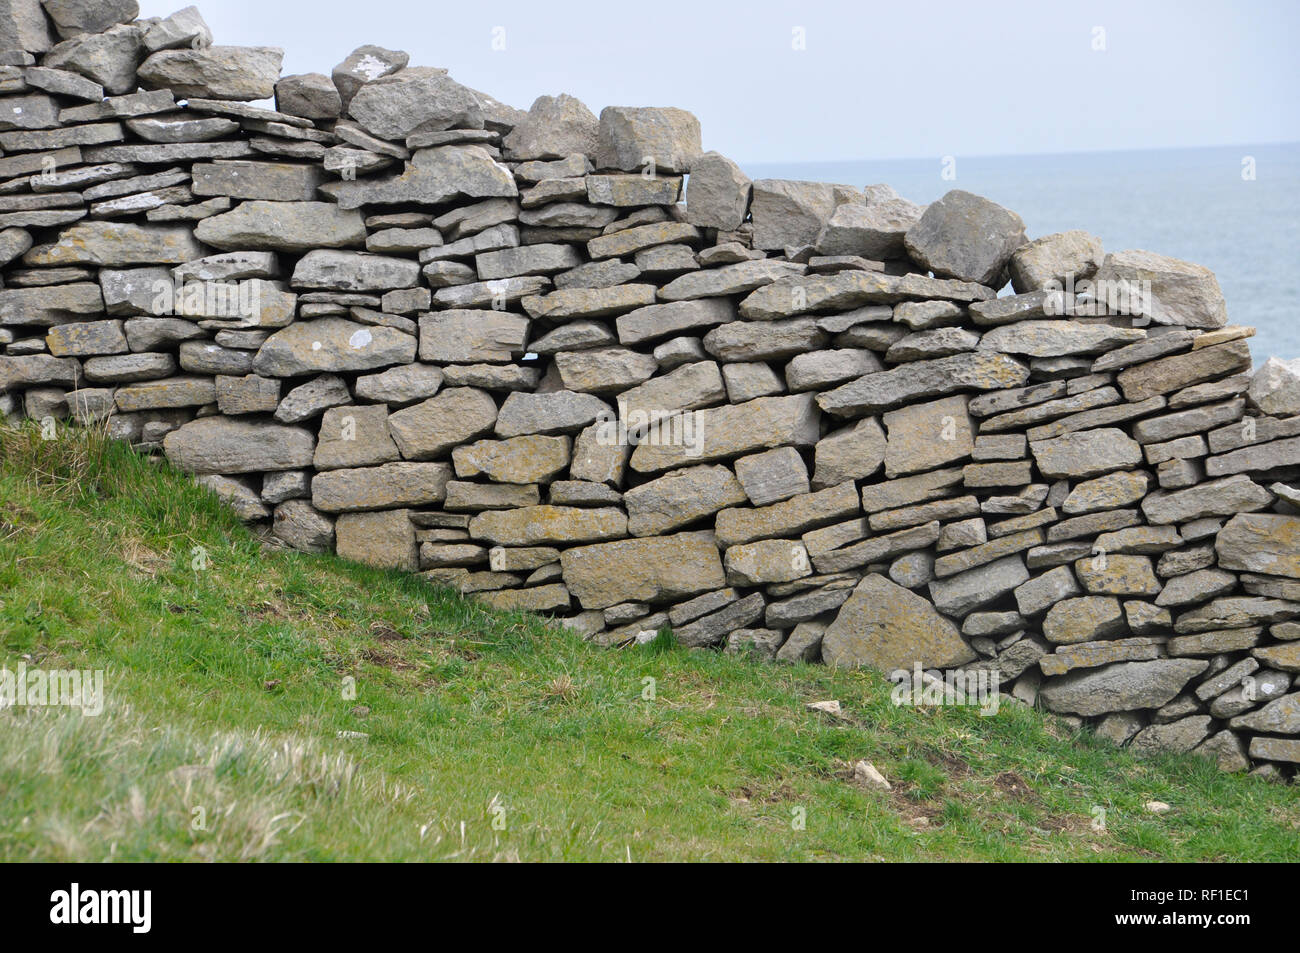 Dry stone wall on the Isle of Purbeck, Dorset. Rough limestone wall divides sloping coastal fields with the sea in the background. Stock Photo